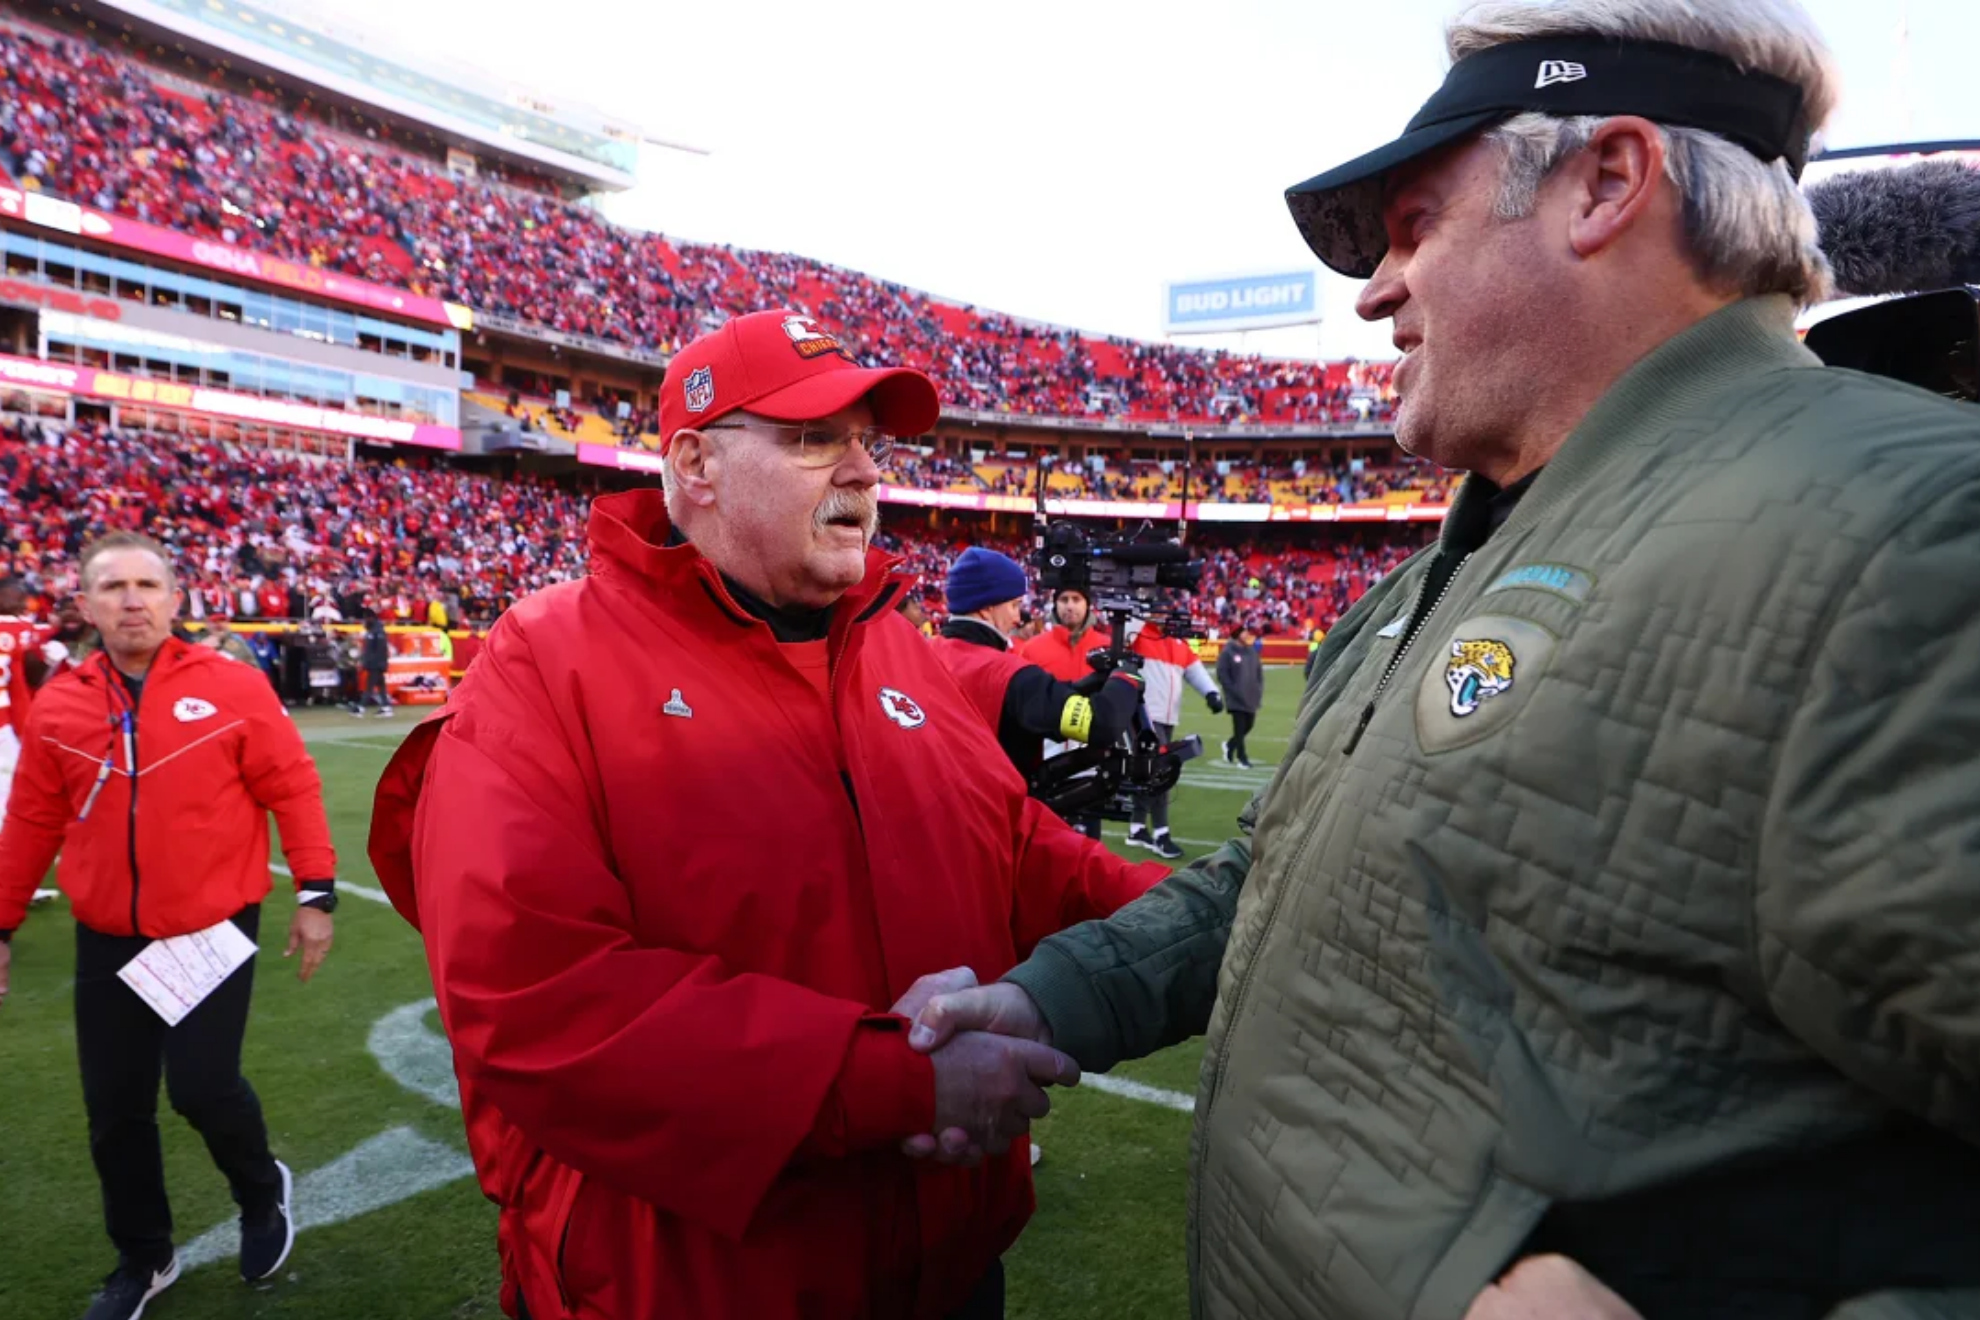 Chiefs and Jaguars will play in the Divisional round of the playoffs.